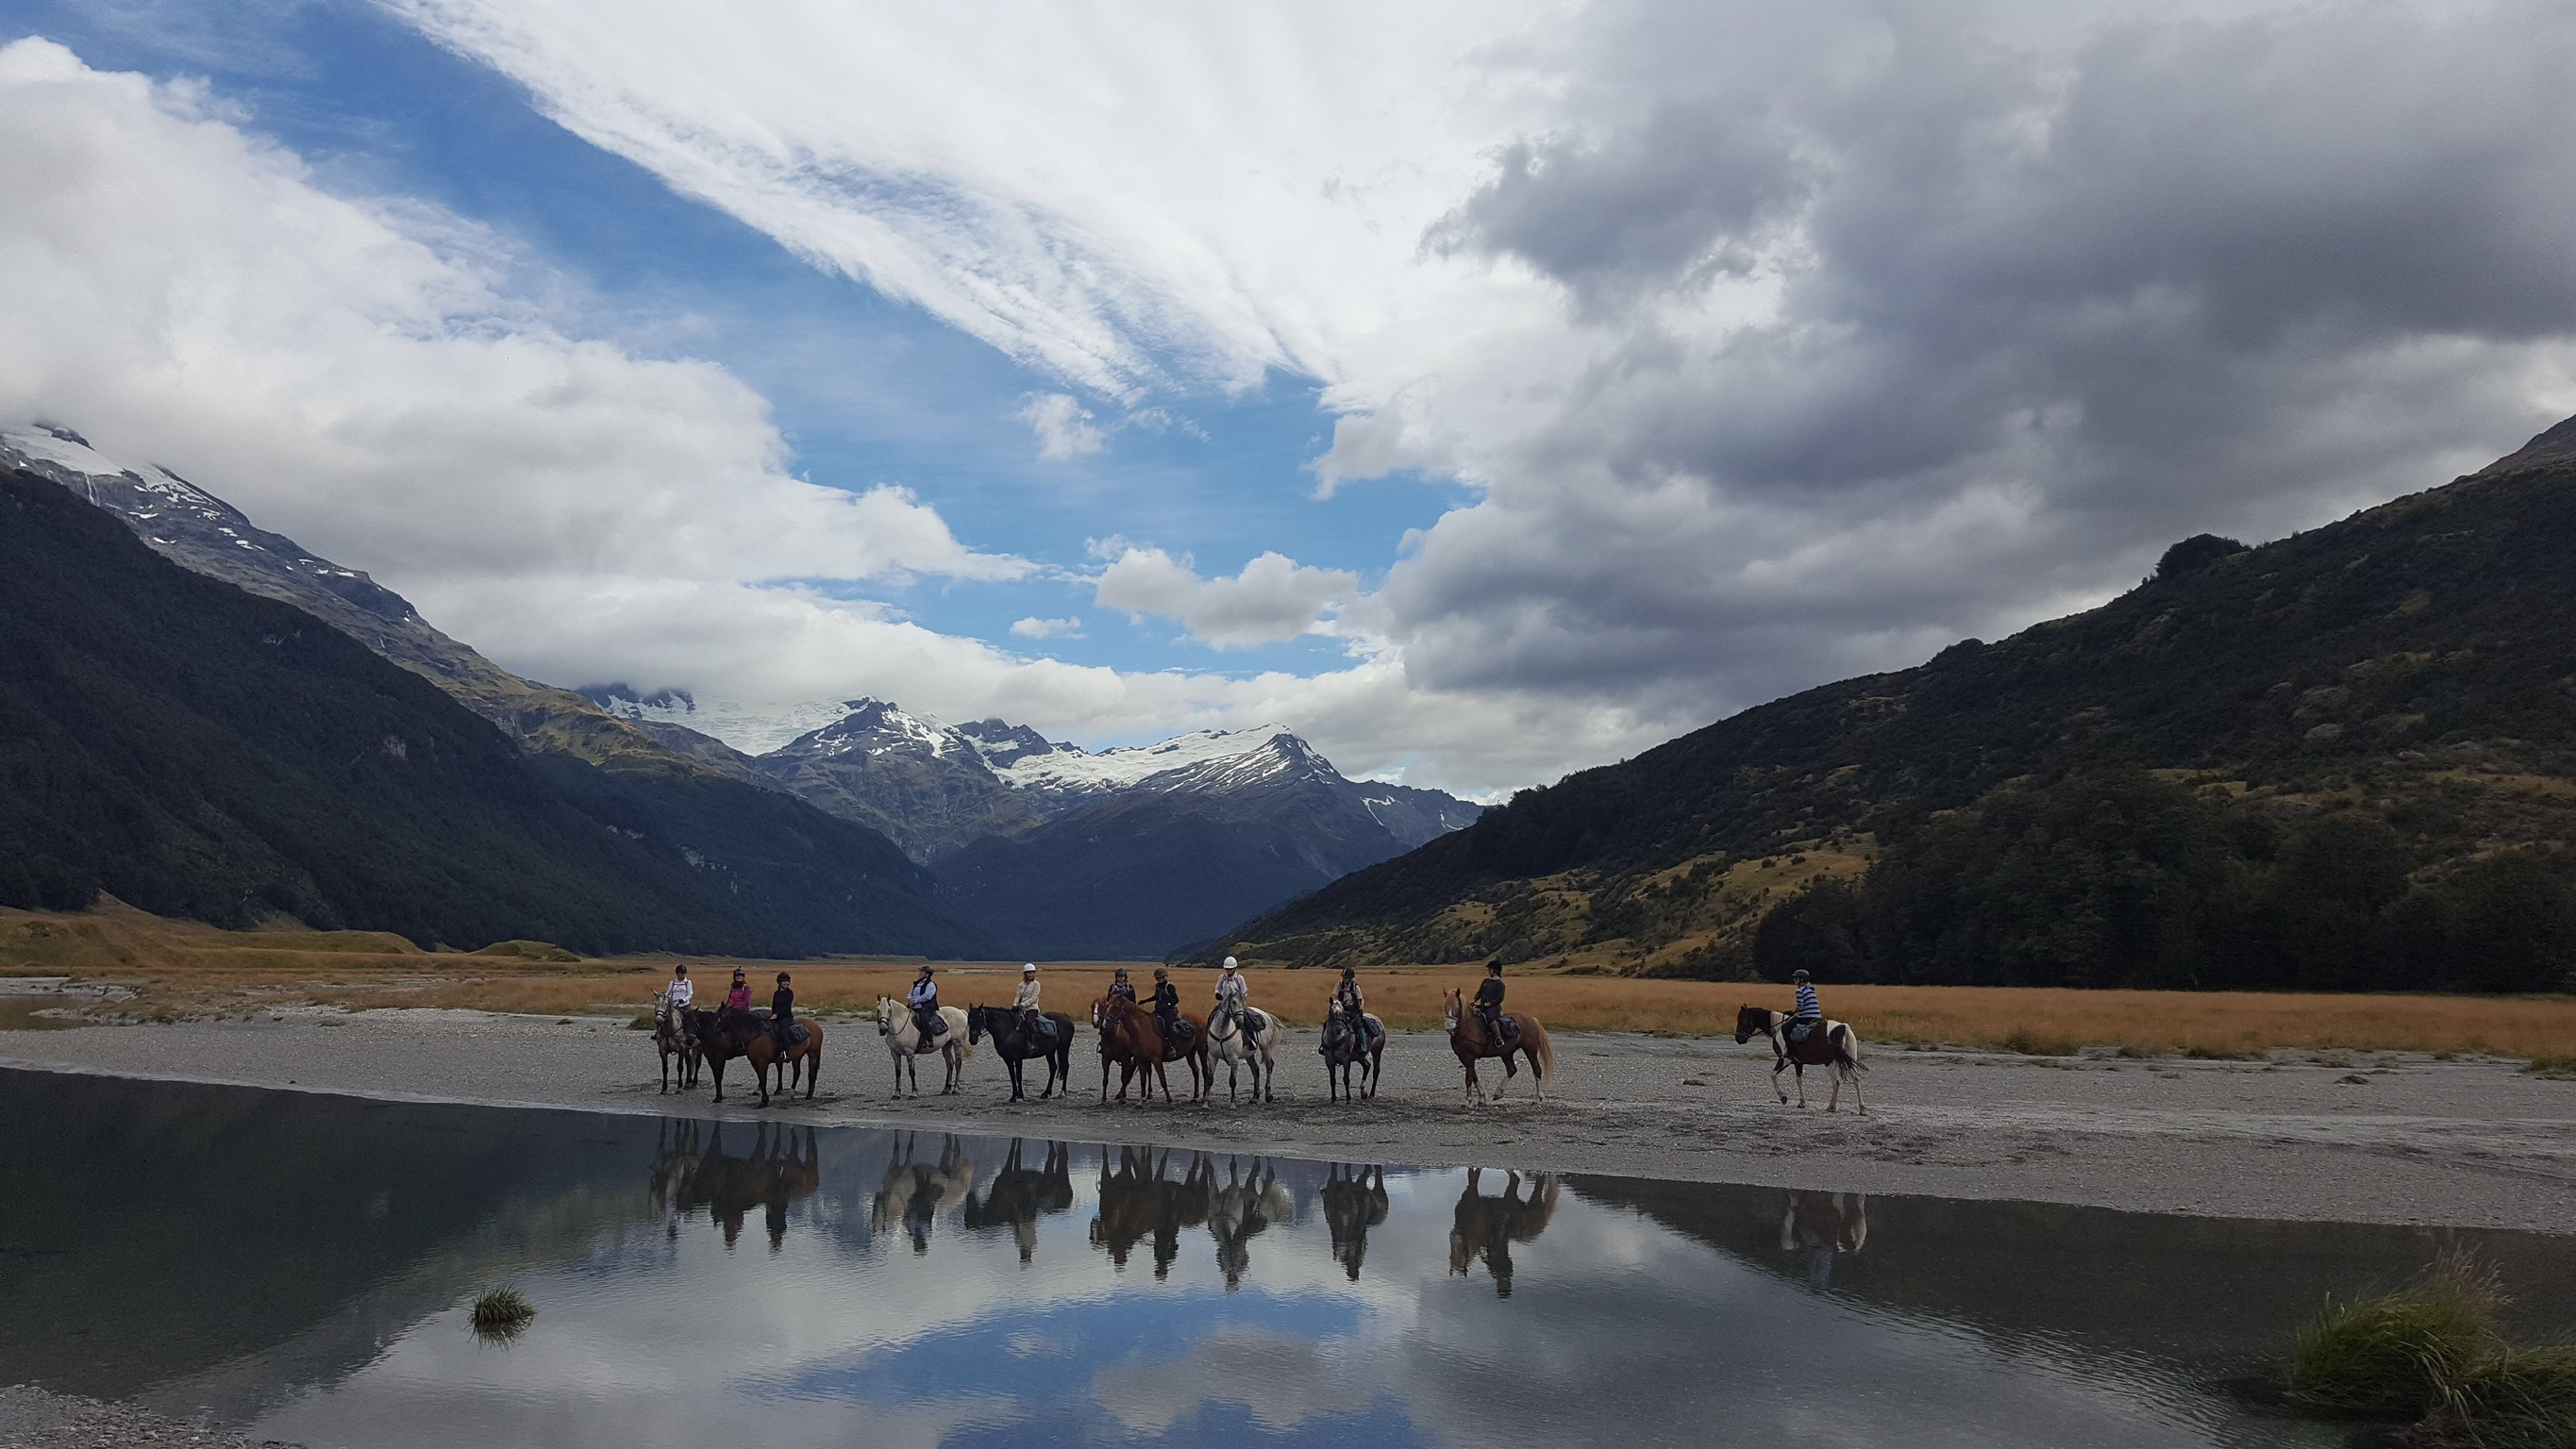 Our group of riders on this amazing ride to Glenorchy, New Zealand. We had to follow the leader across the waters to other side in case one of us got stuck in the quick sand. All went well and no one got stuck in the mud. 